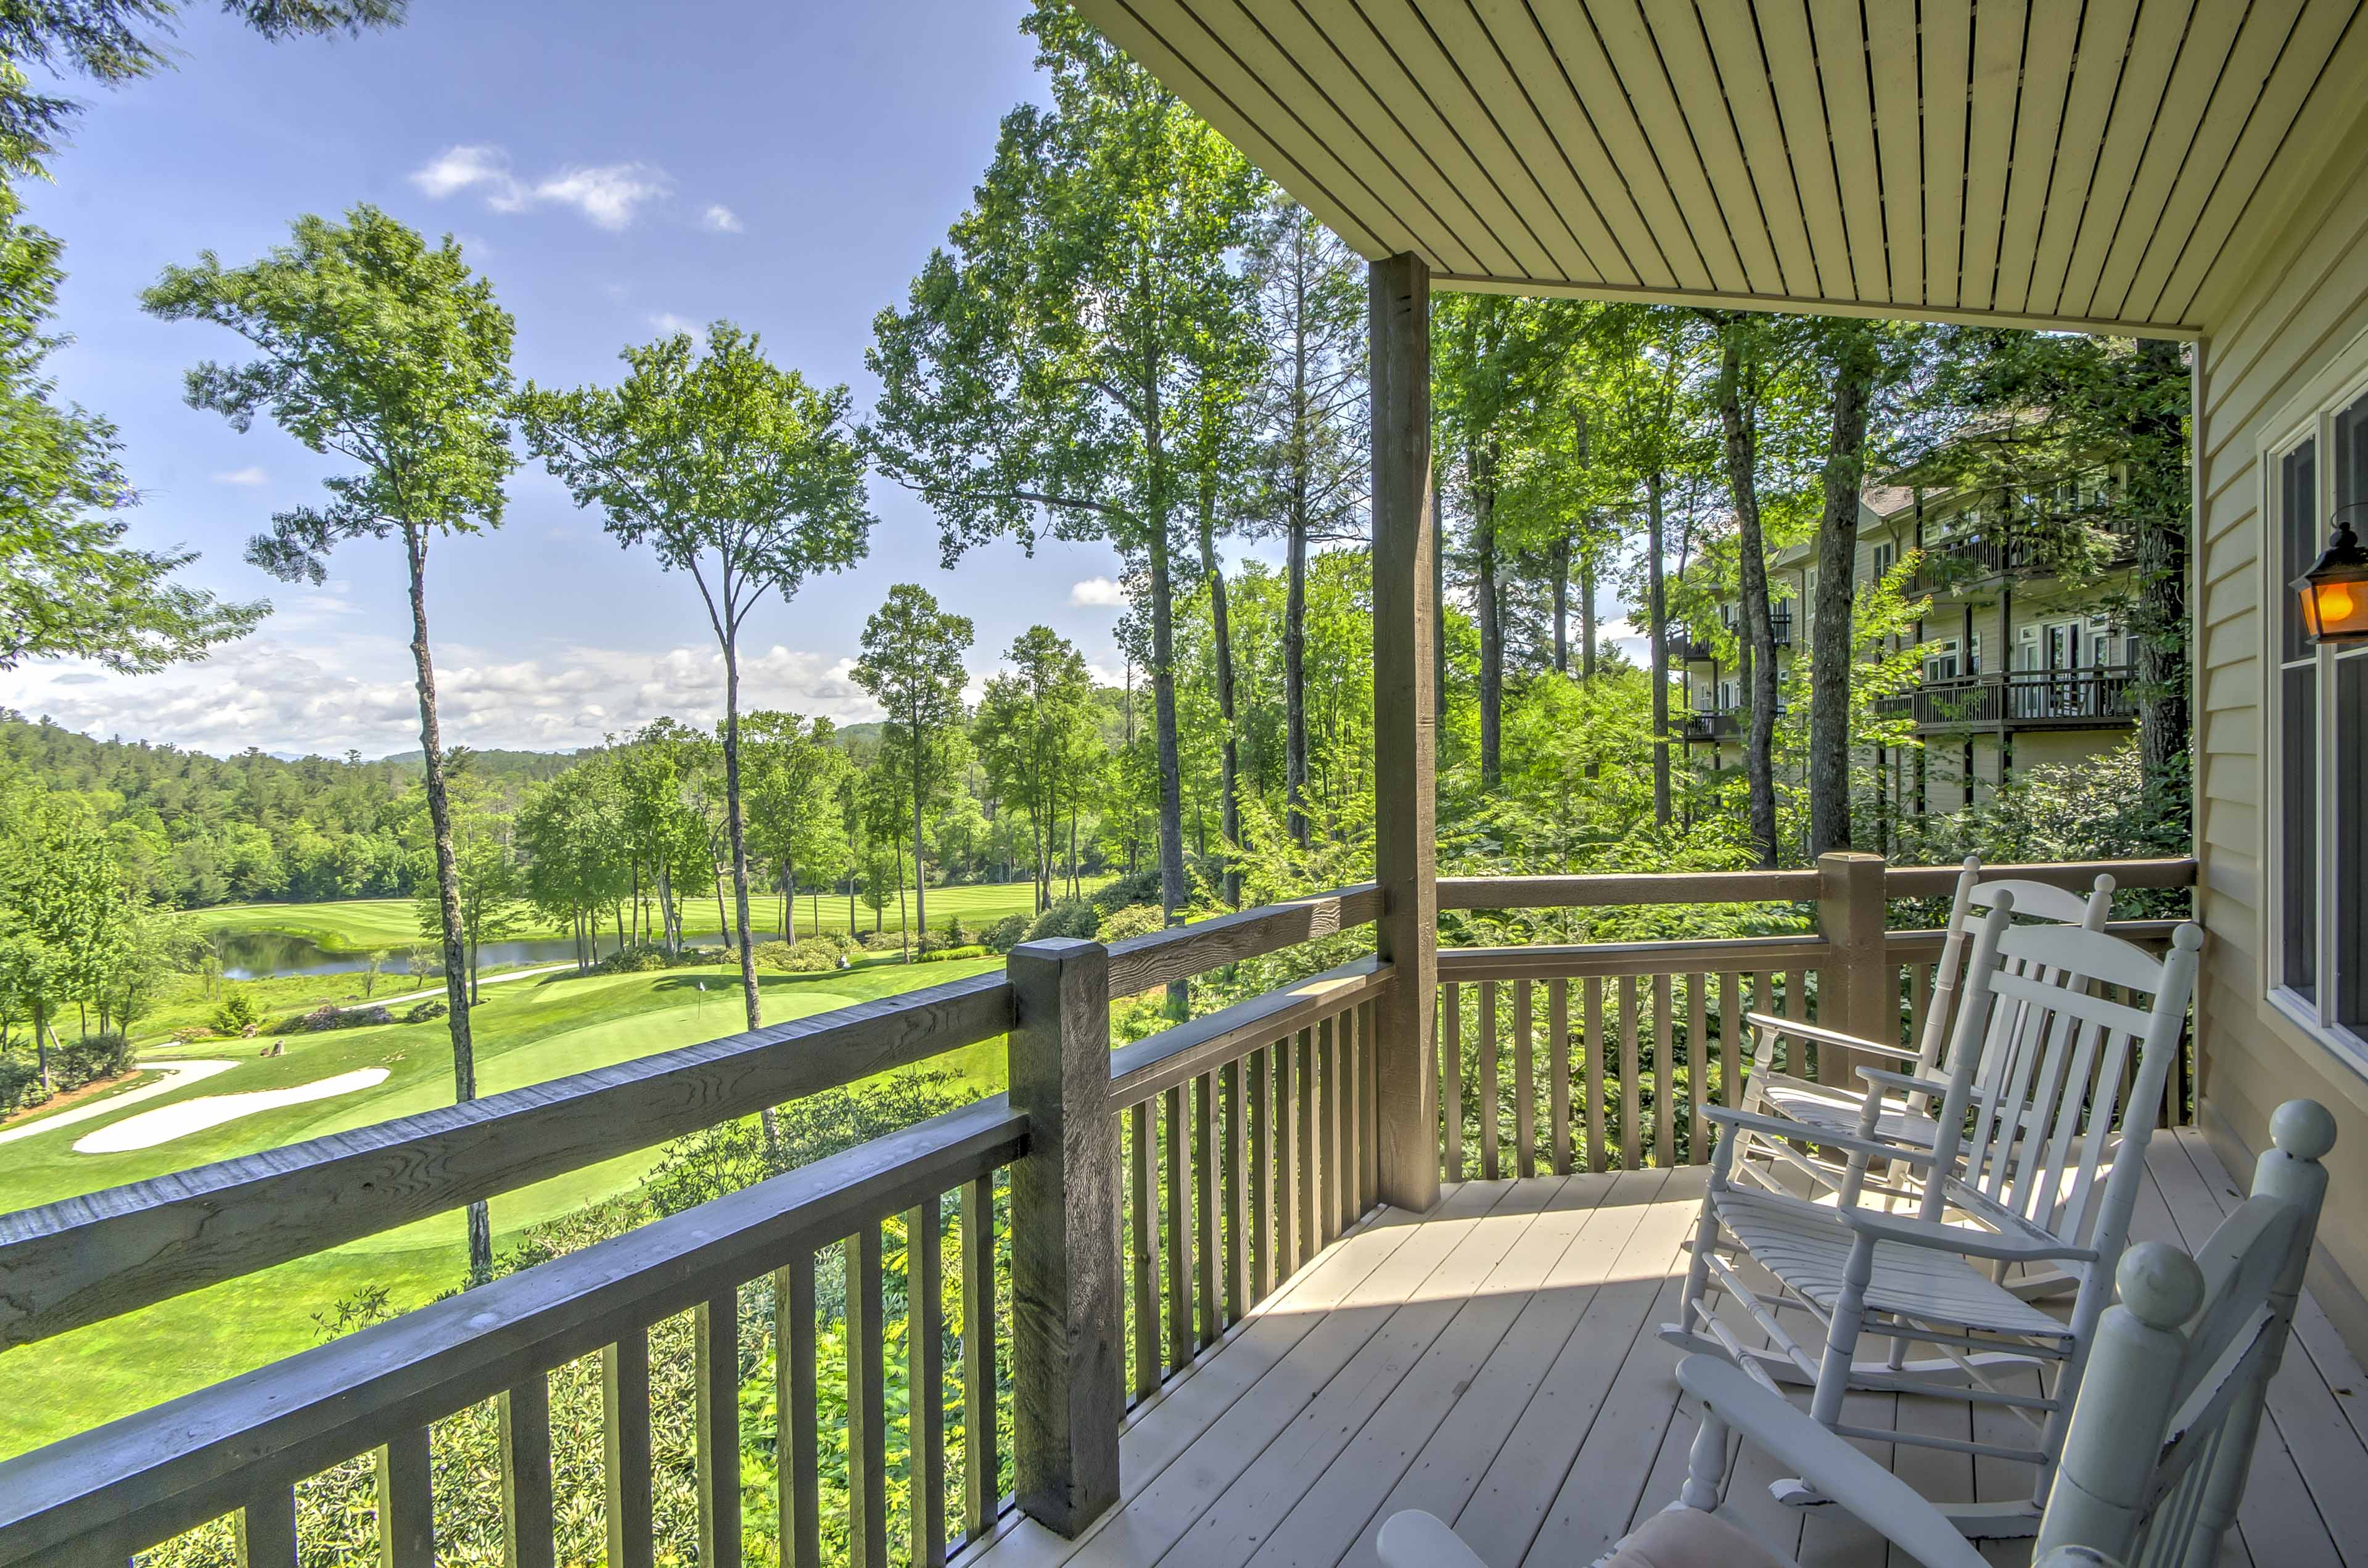 A memorable retreat awaits you at this 3-bedroom, 3-bathroom Highlands vacation rental condo situated on a golf course.